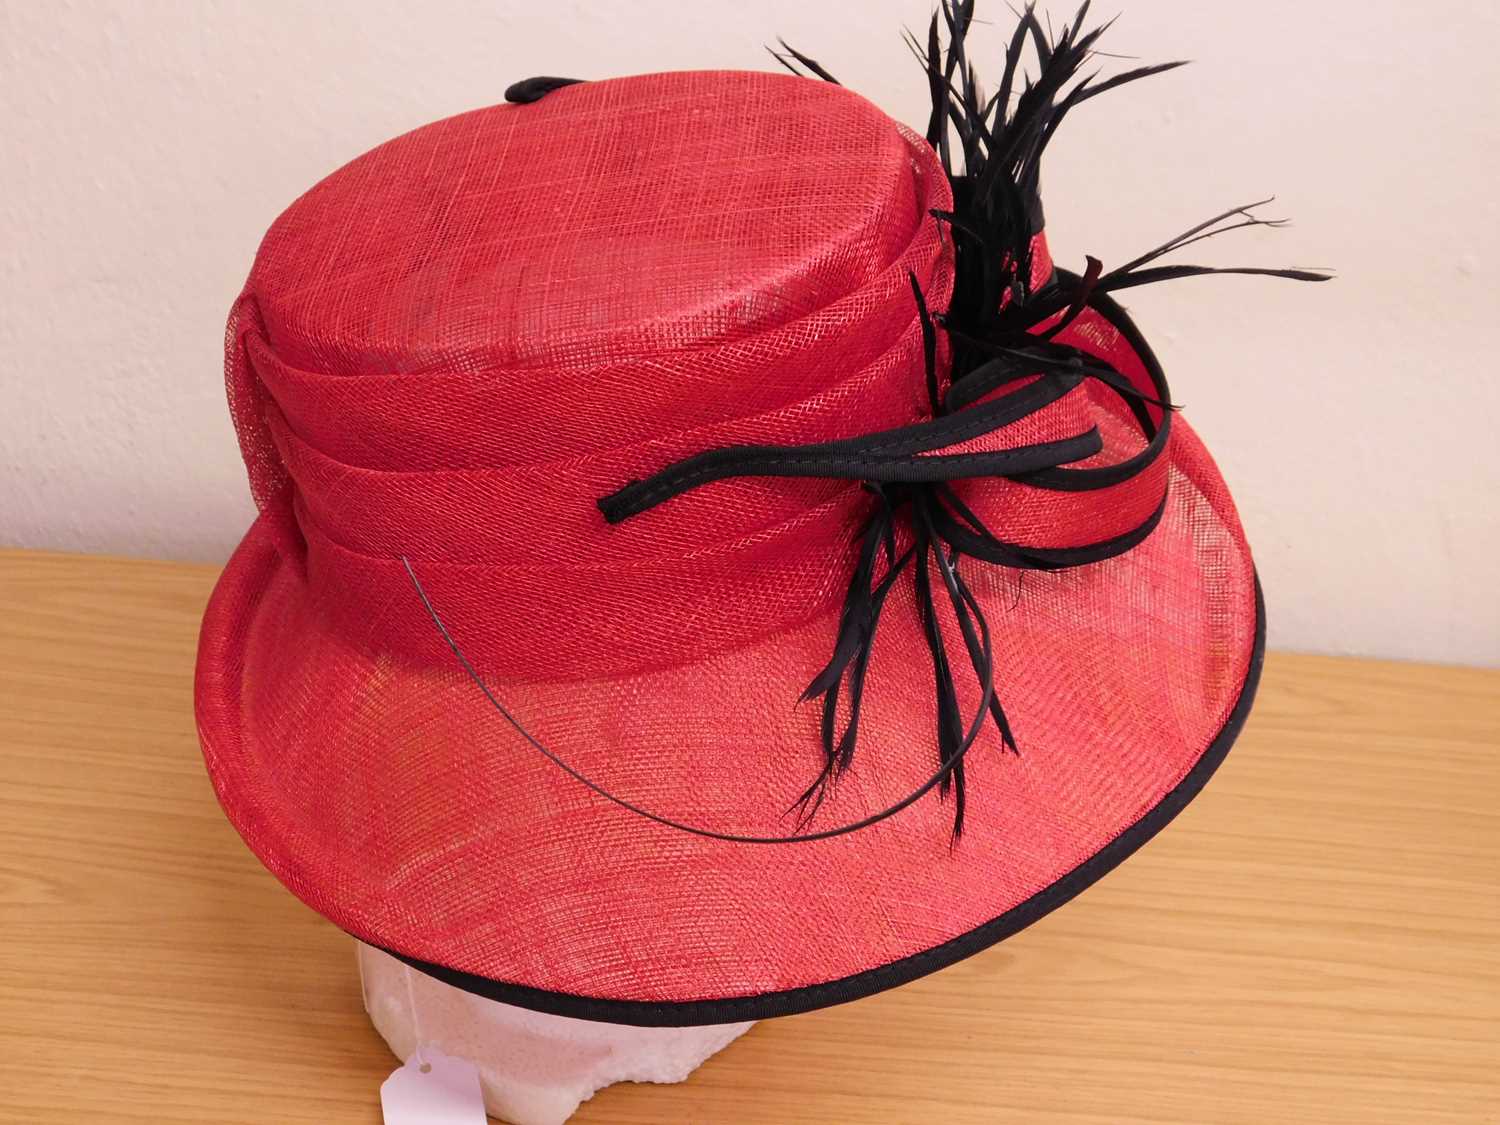 A Cappelli Condici straw hat in red with black trim and detail, new with tags - Image 3 of 3